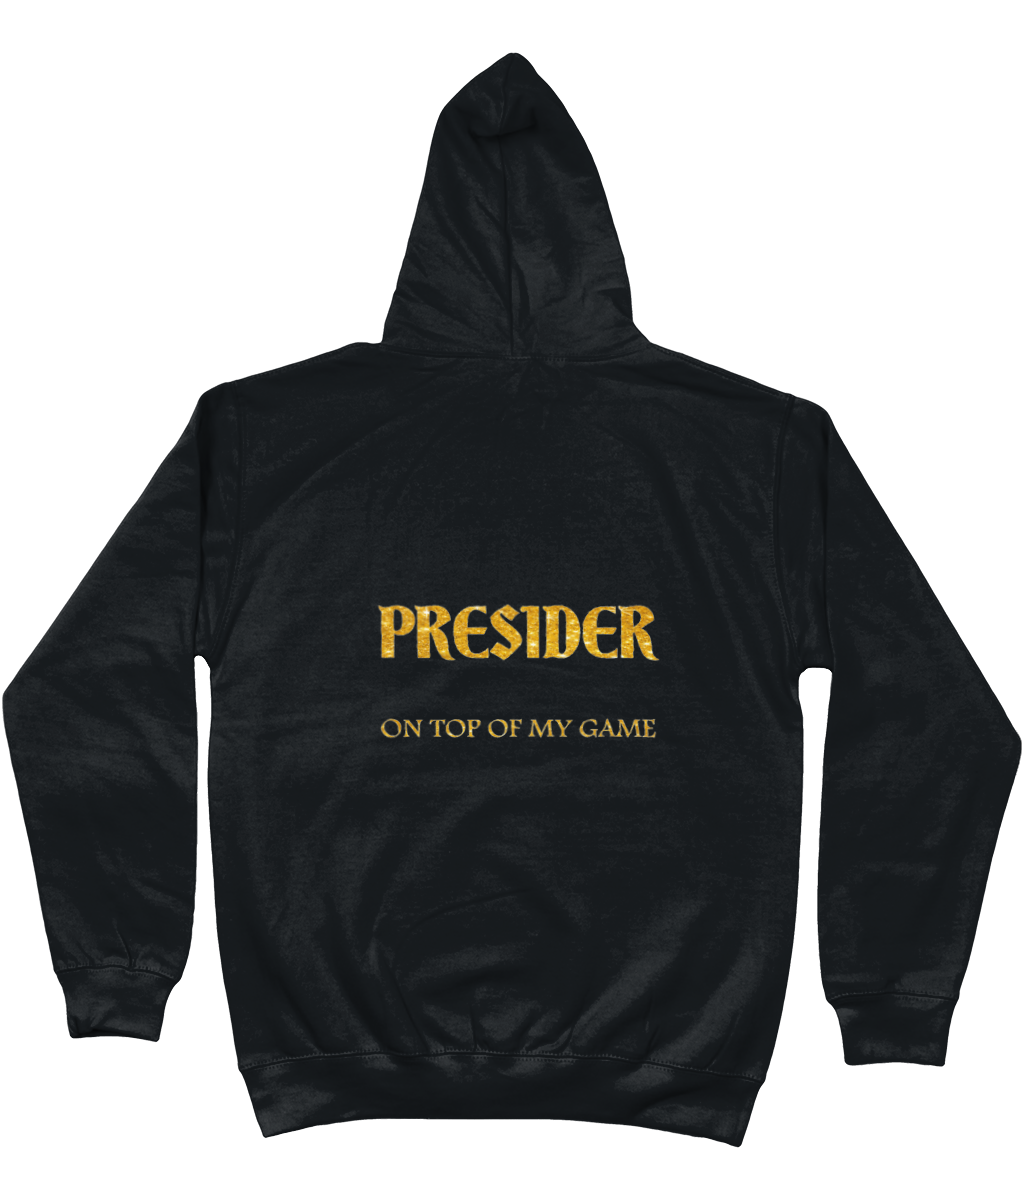 'On Top Of My Game' Special Edition Gold Glitter Pattern Hoodie (Black Smoke)